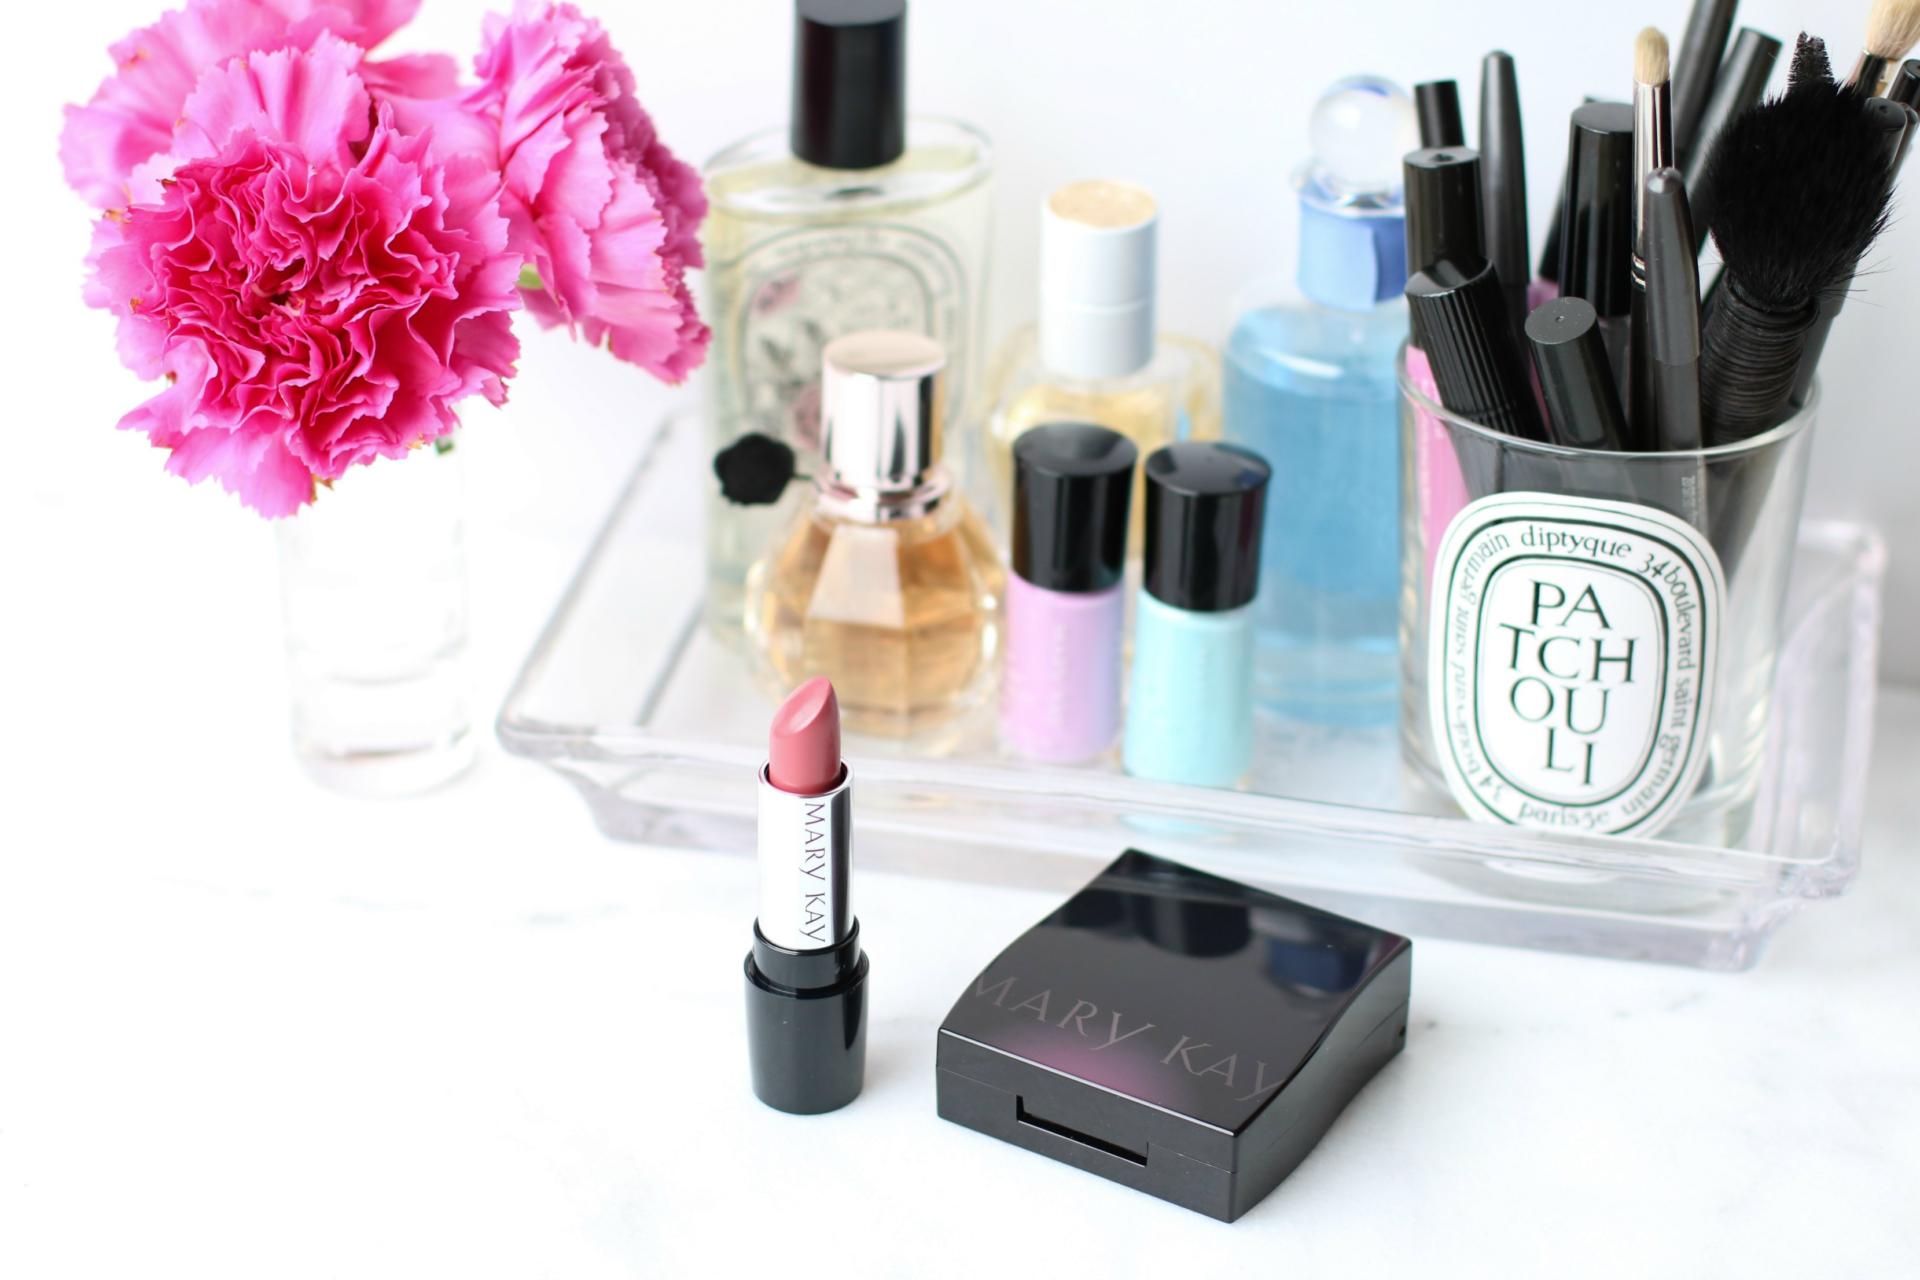 Mary Kay's collection of summer makeup is so pretty and cute - you gotta try them NOW!